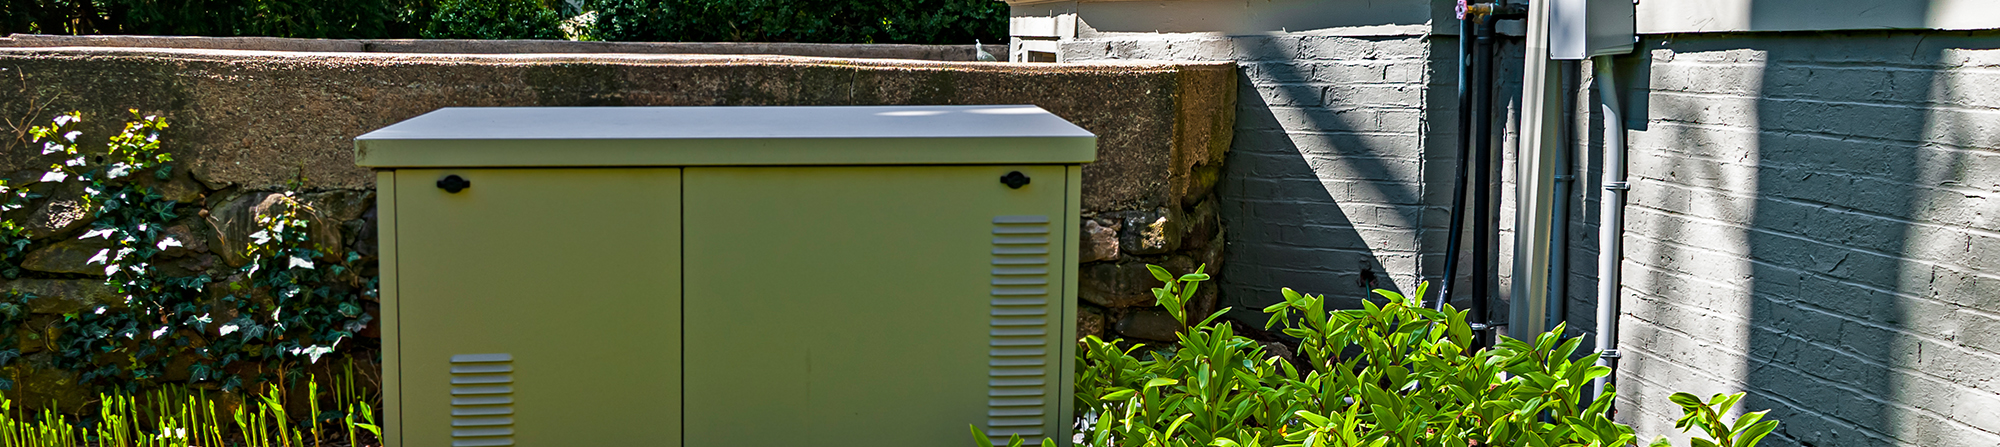 How to Choose the Right Backup Generator for Your Home